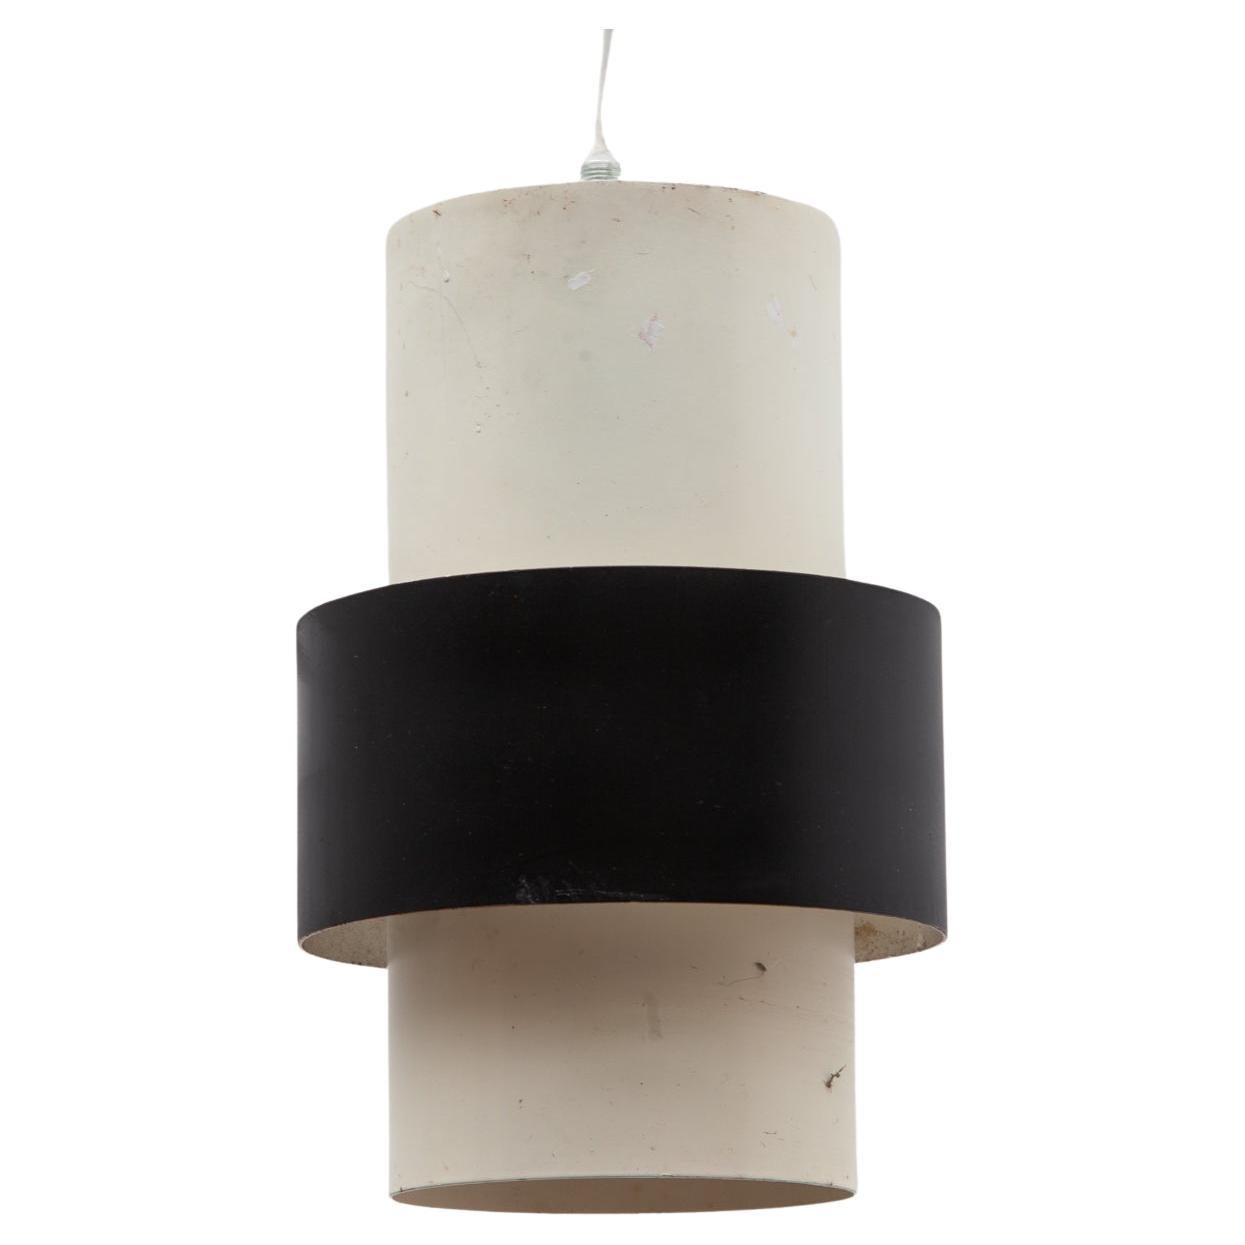 Dutch Design Black and White Pendant Lamp 1960s, by Philips